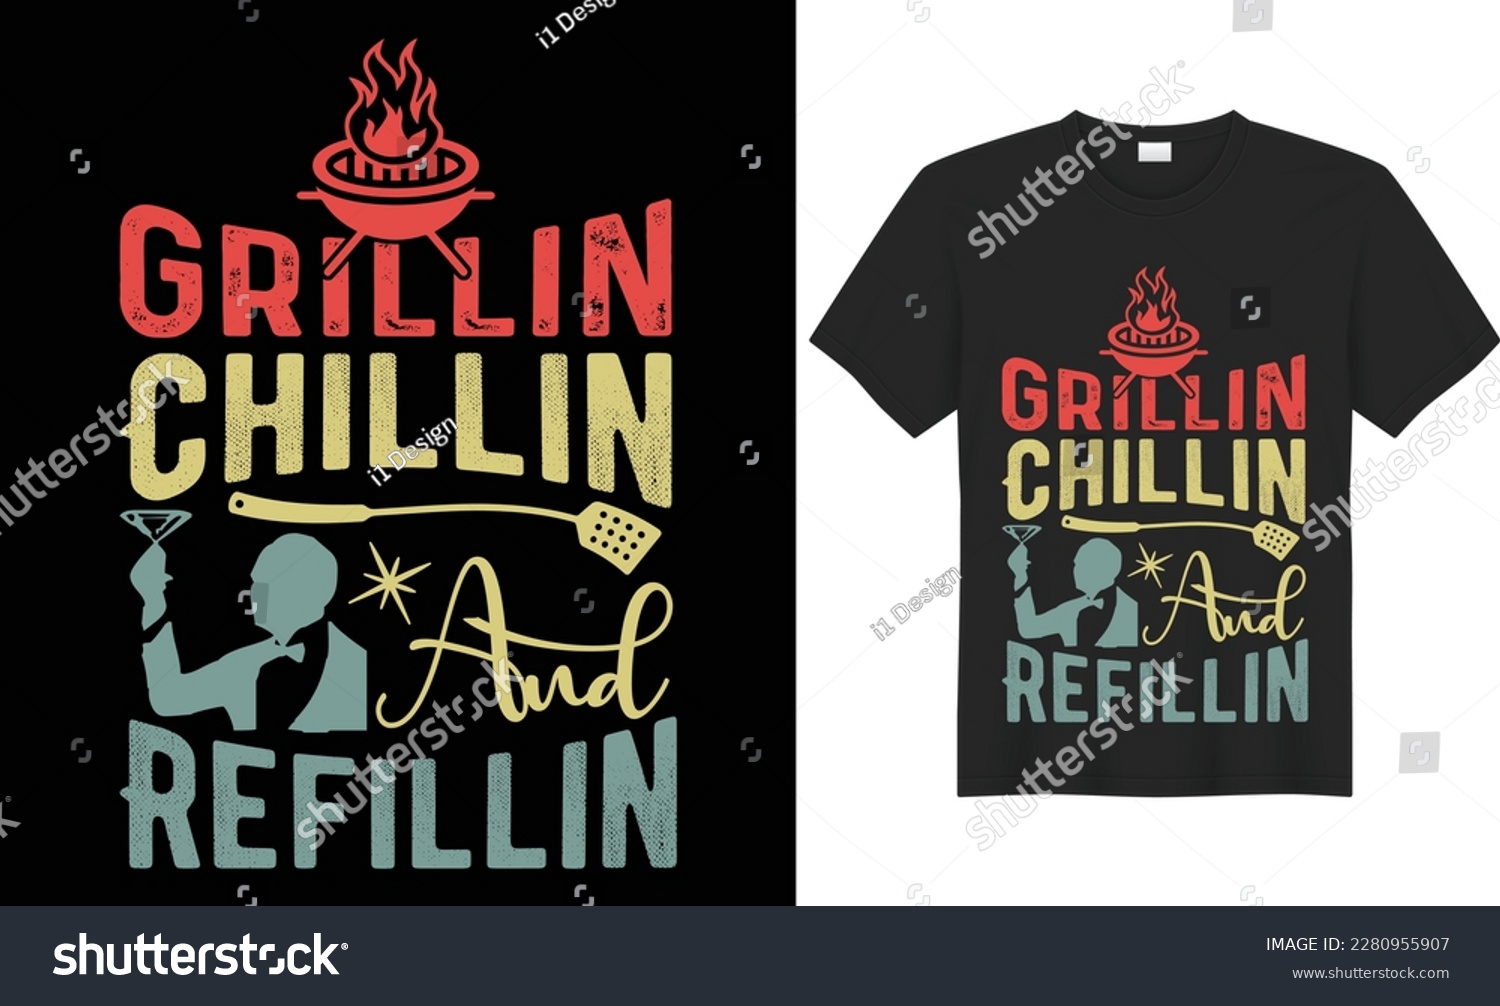 SVG of Chillin Grillin and Refillin BBQ Colorful Typography SVG T-shirt  Design Vector Template. Lettering Illustration And Printing for T-shirt, Banner, Poster, Flyers, Etc. svg